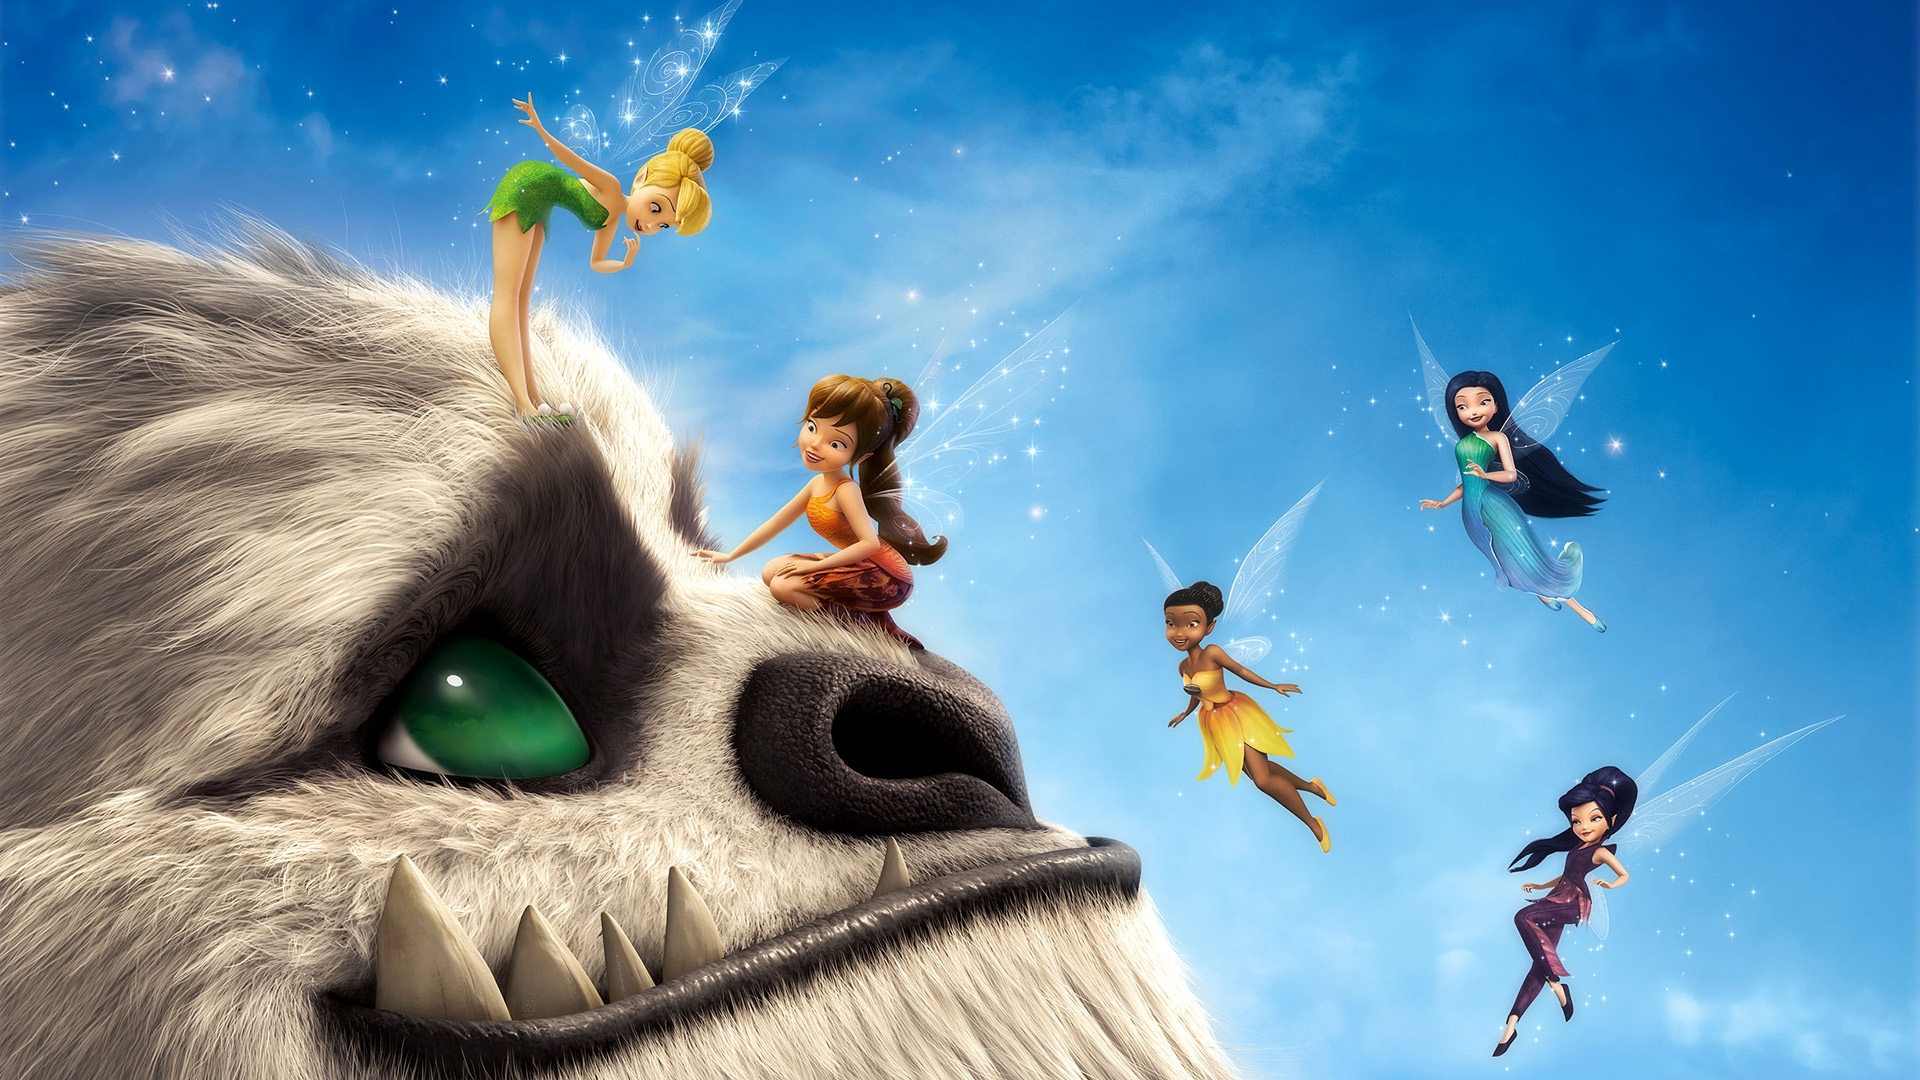 Fairy Gruff Tinker Bell Tinker Bell Tinker Bell And The Legend Of The Neverbeast 1920x1080